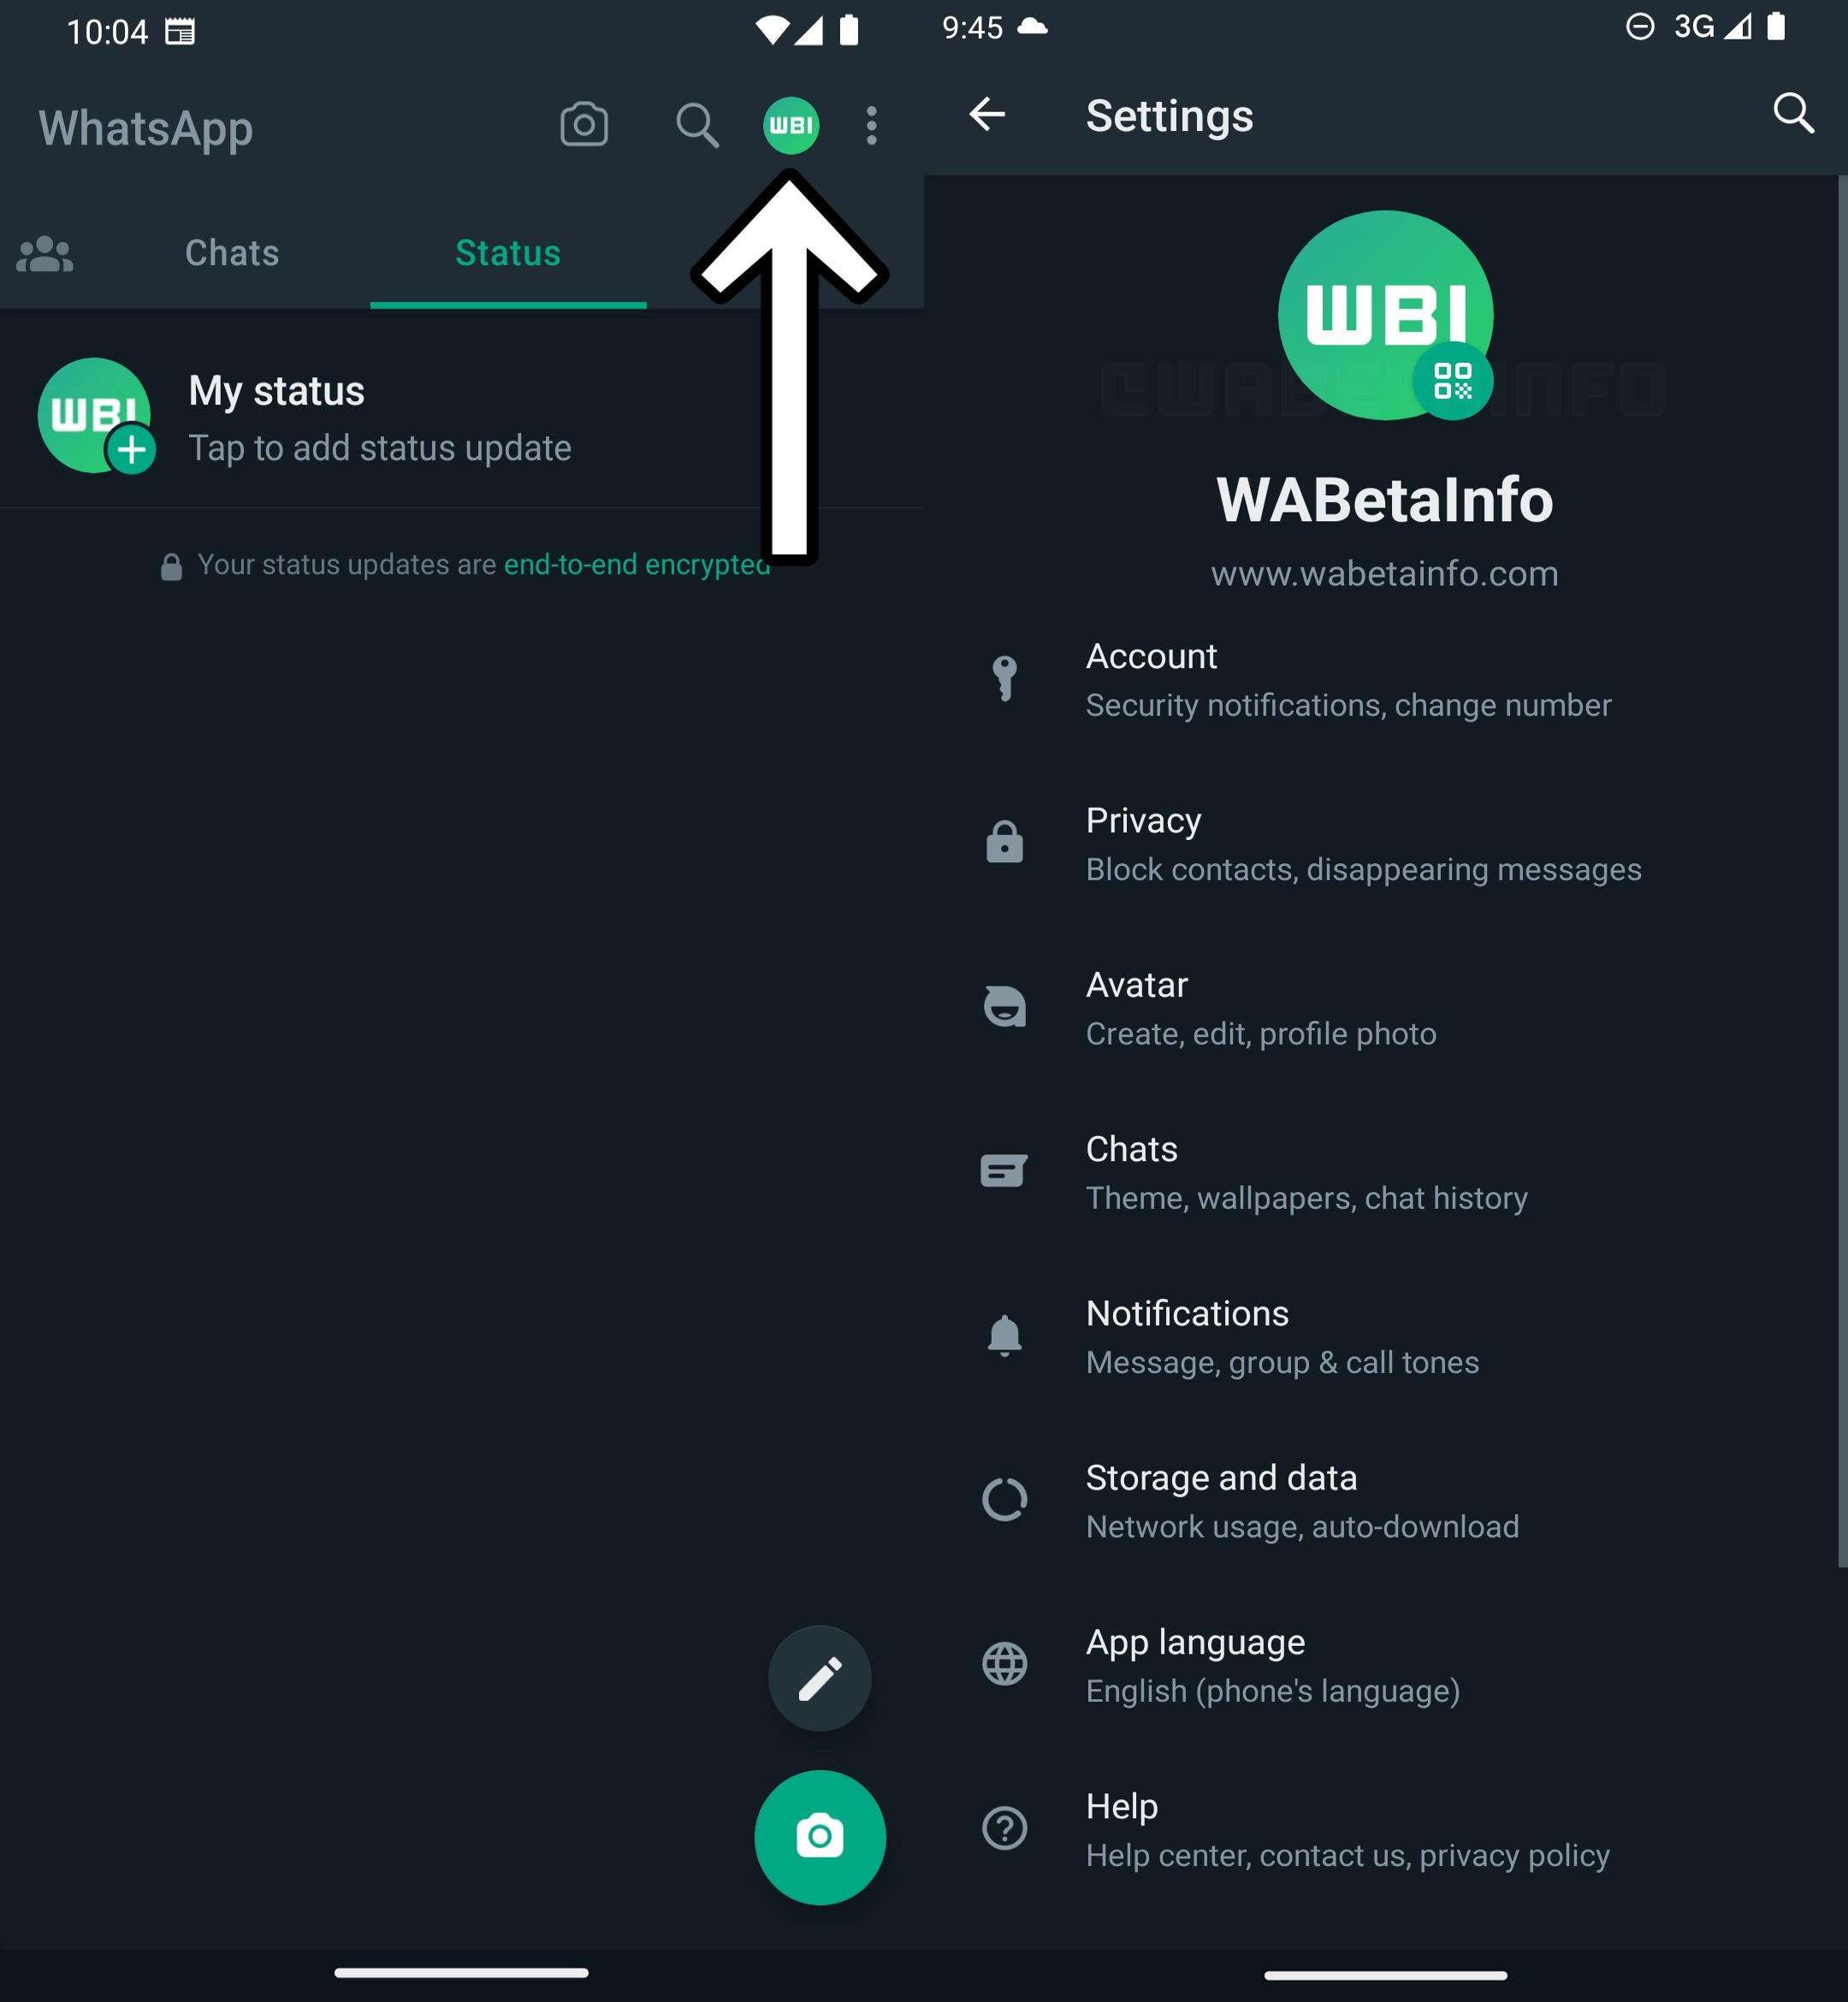 Whatsapp settings menu with a quick button for settings